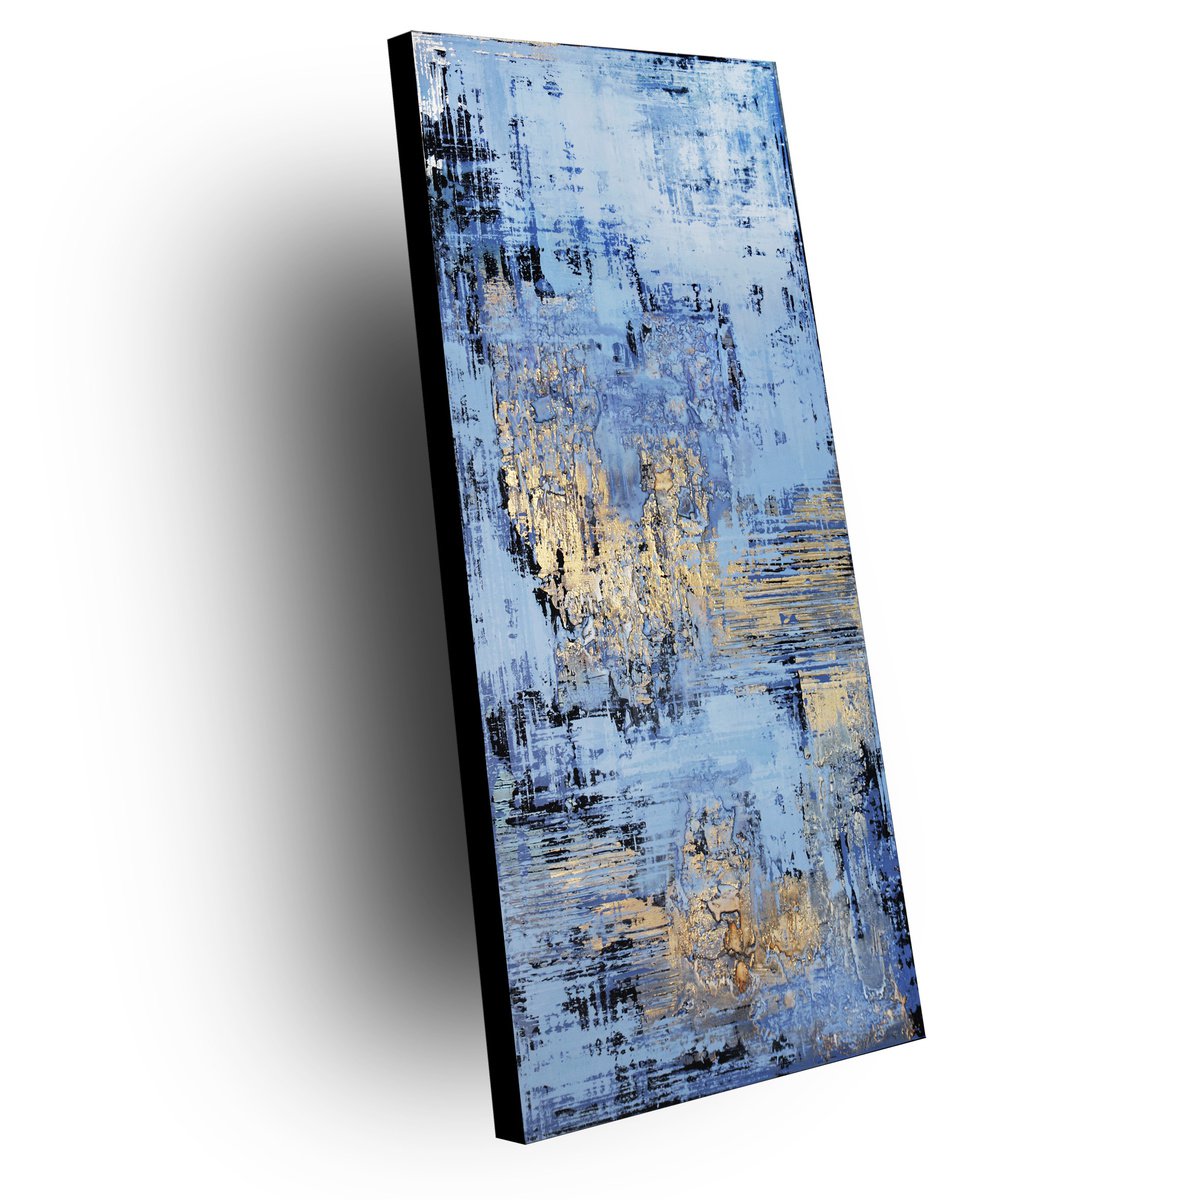 AVALON * 47.2 x 19.7 * ABSTRACT ACRYLIC PAINTING ON CANVAS * BLUE * GOLD by Inez Froehlich